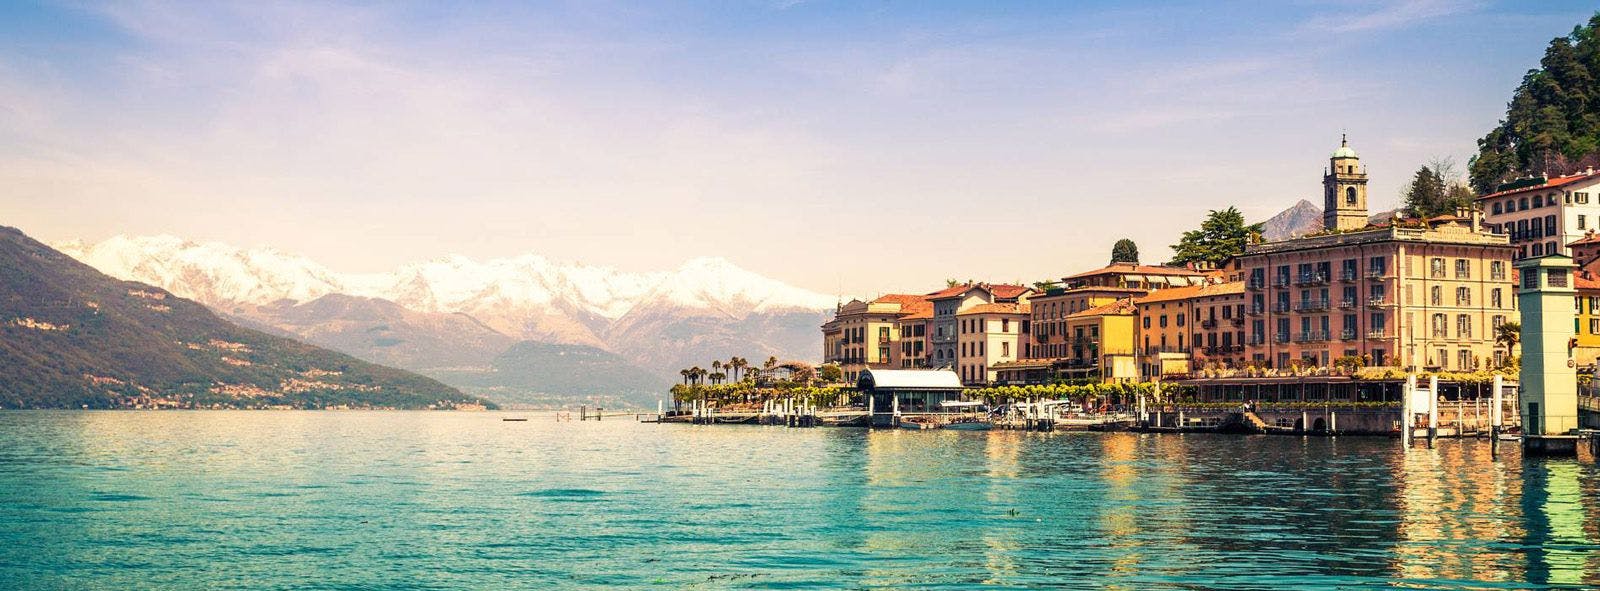 Lake Como town by the water with snow capped mountains in the distance